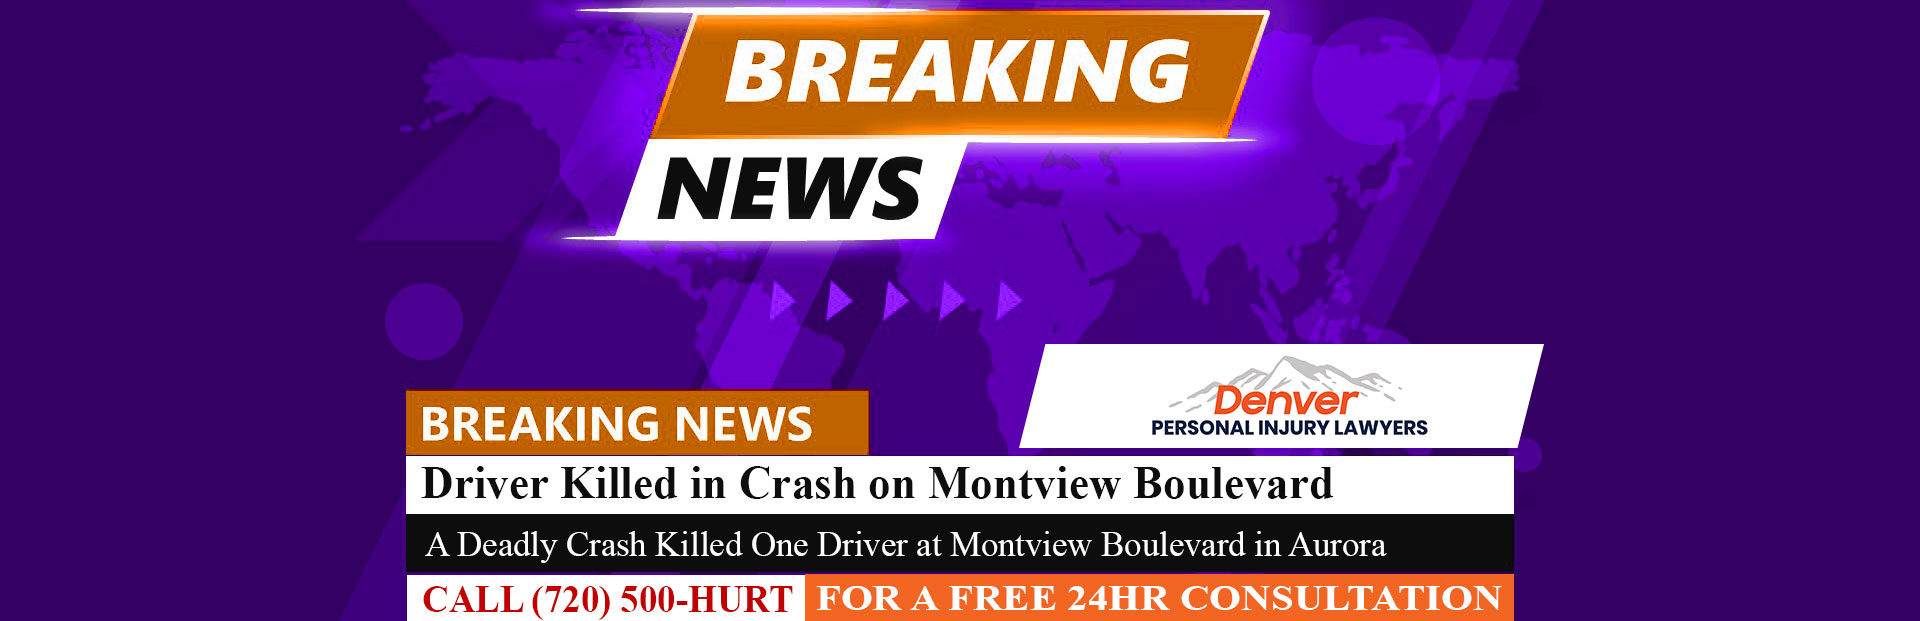 [03-02-23] Driver Killed in Crash on Montview Boulevard